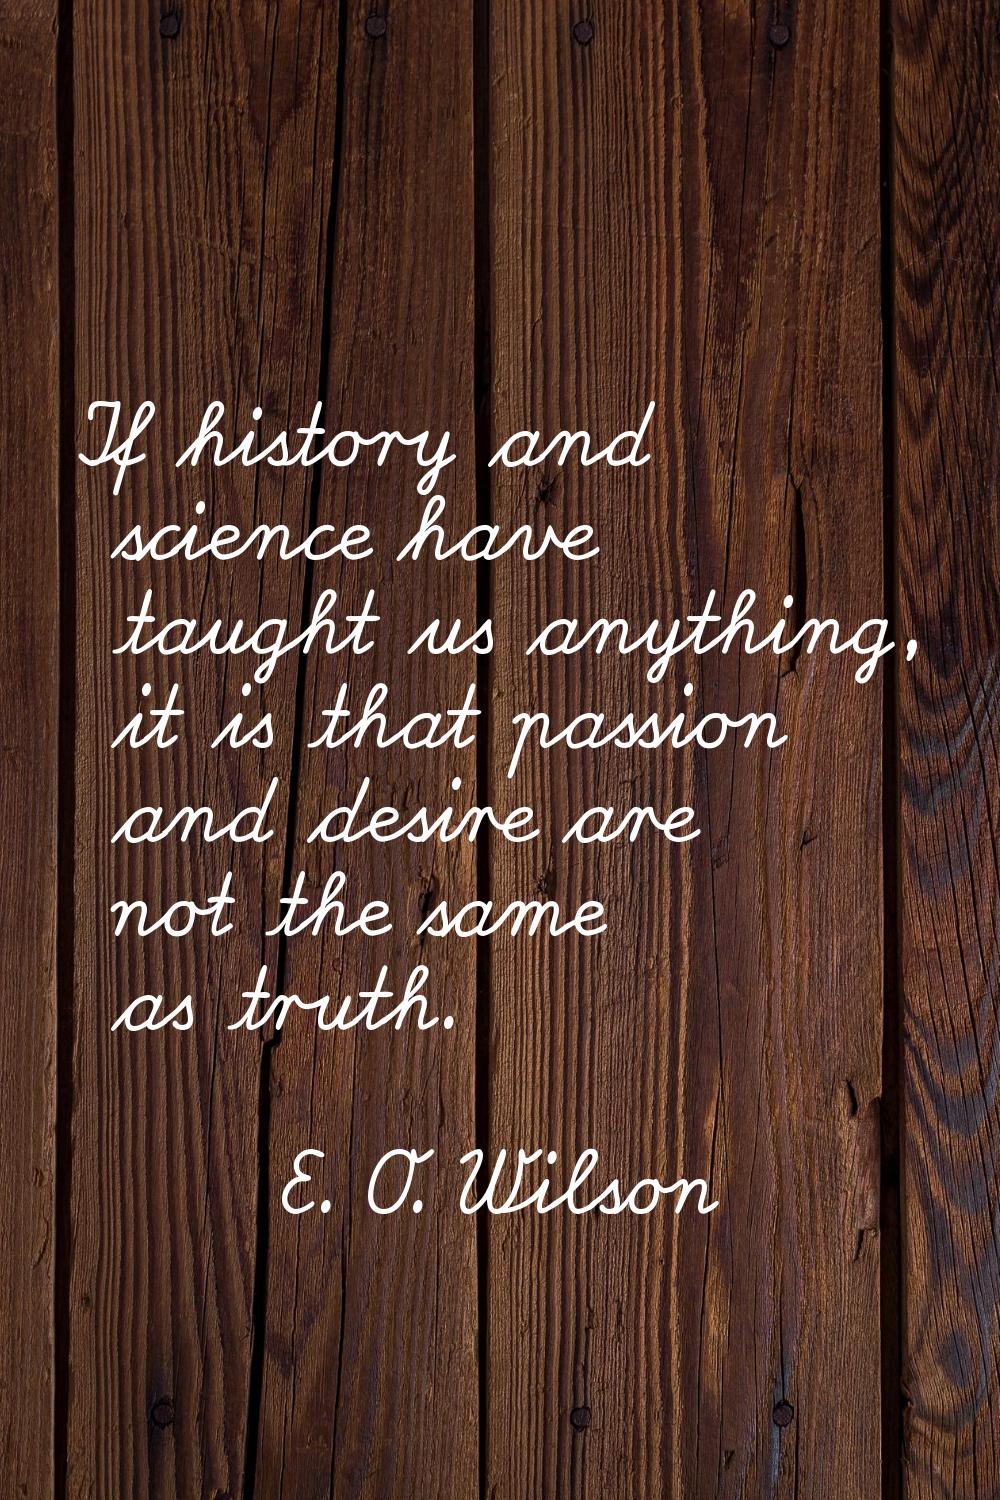 If history and science have taught us anything, it is that passion and desire are not the same as t